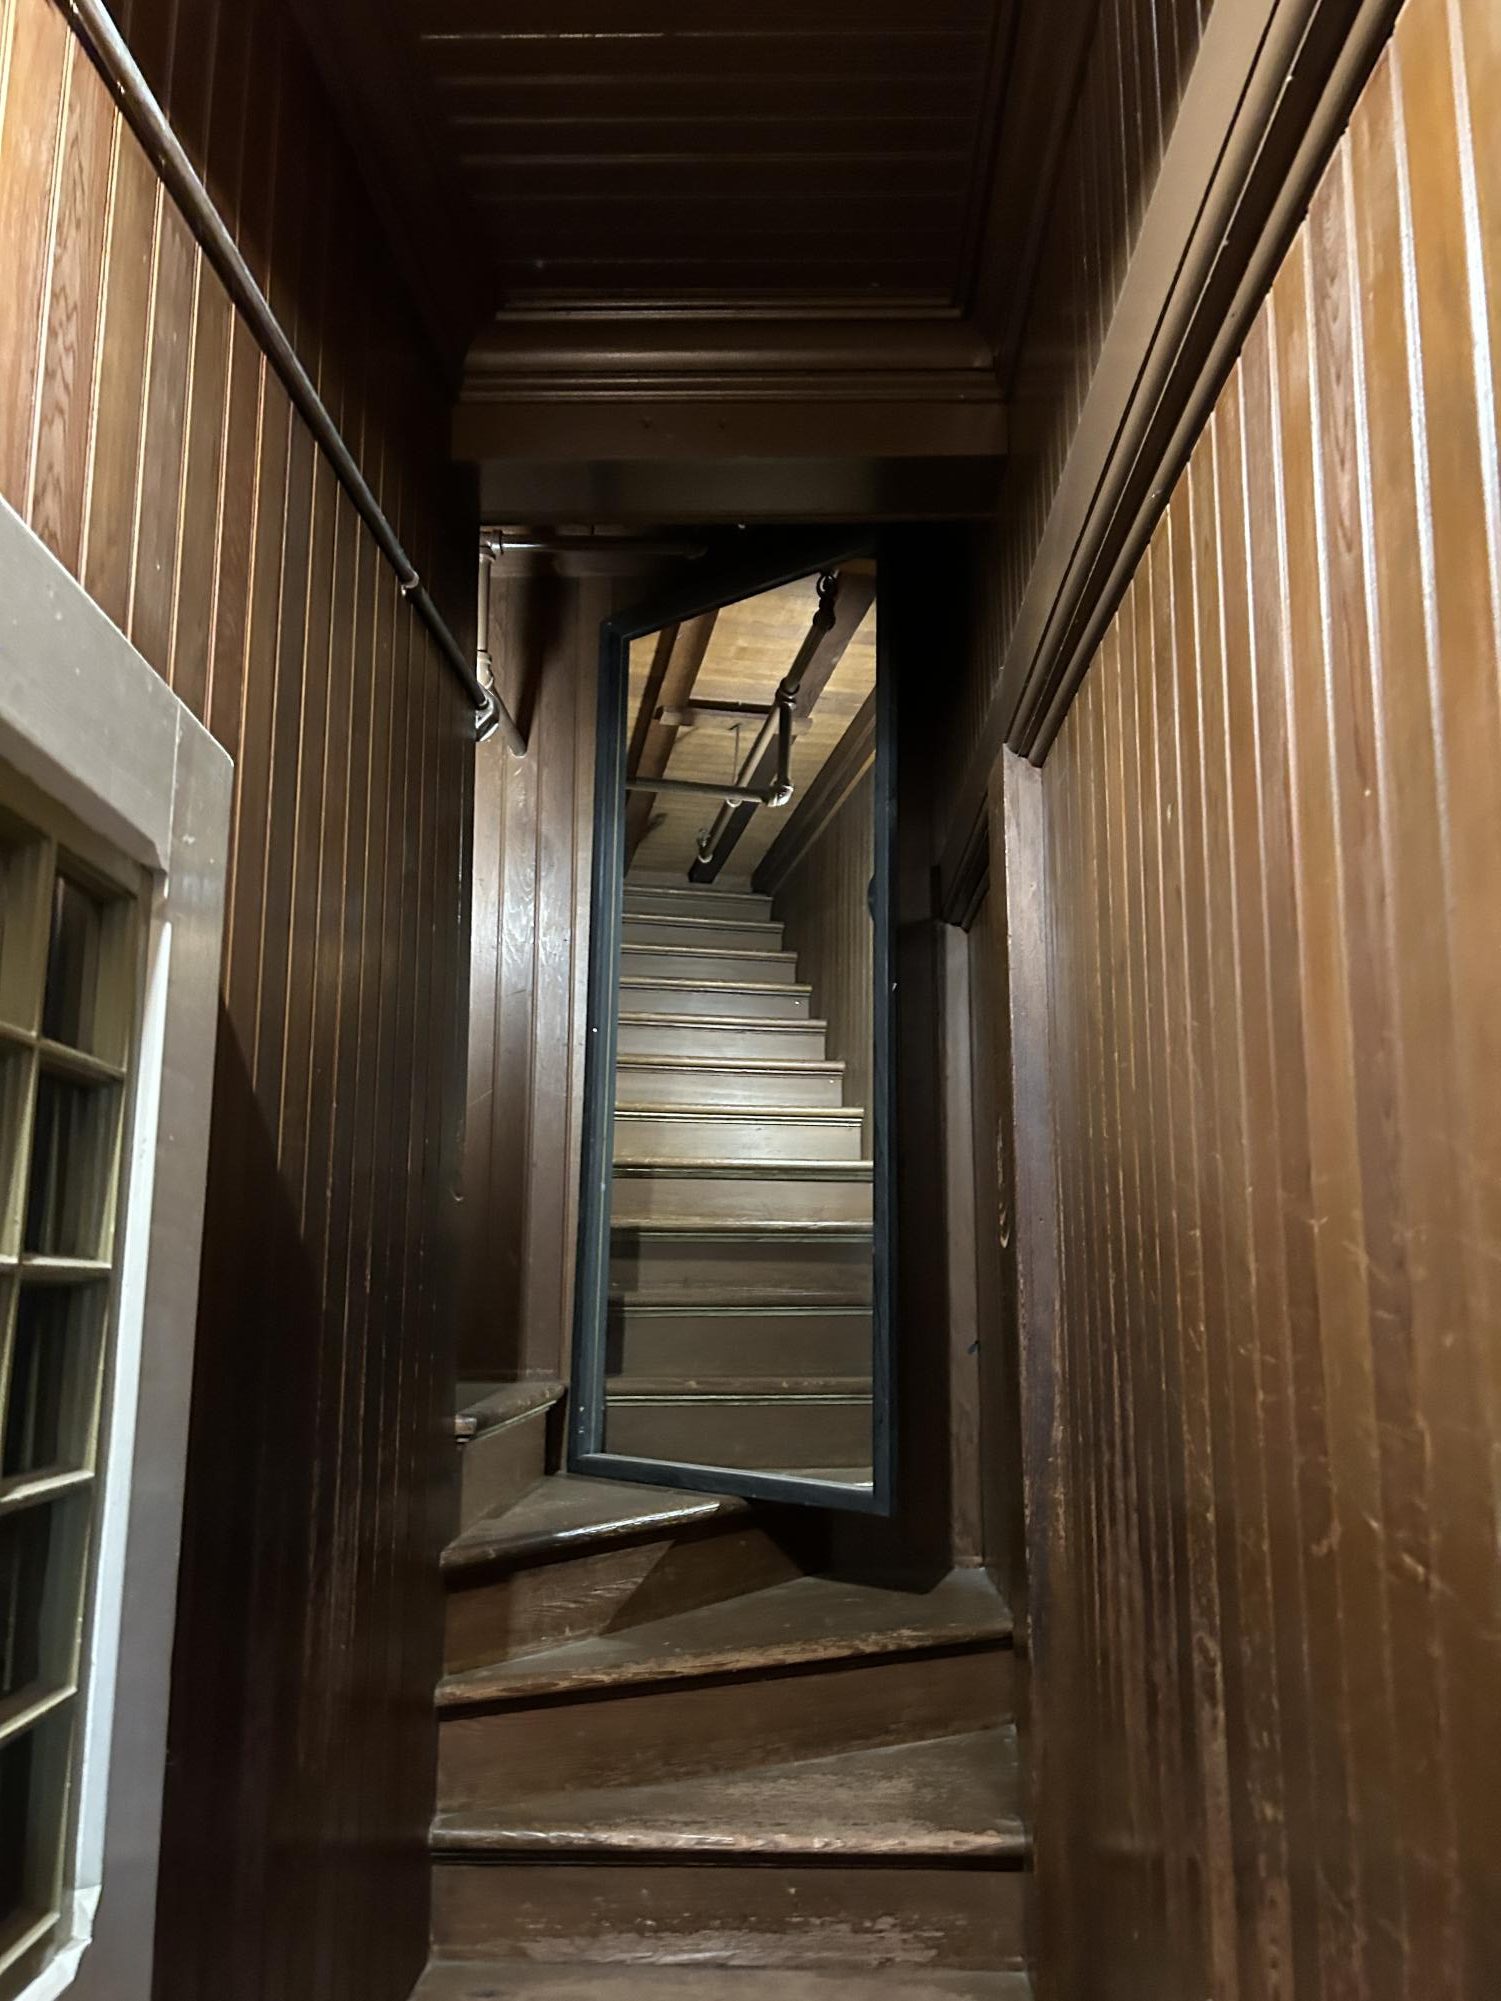 A Supernatural Experience at Winchester Mystery House